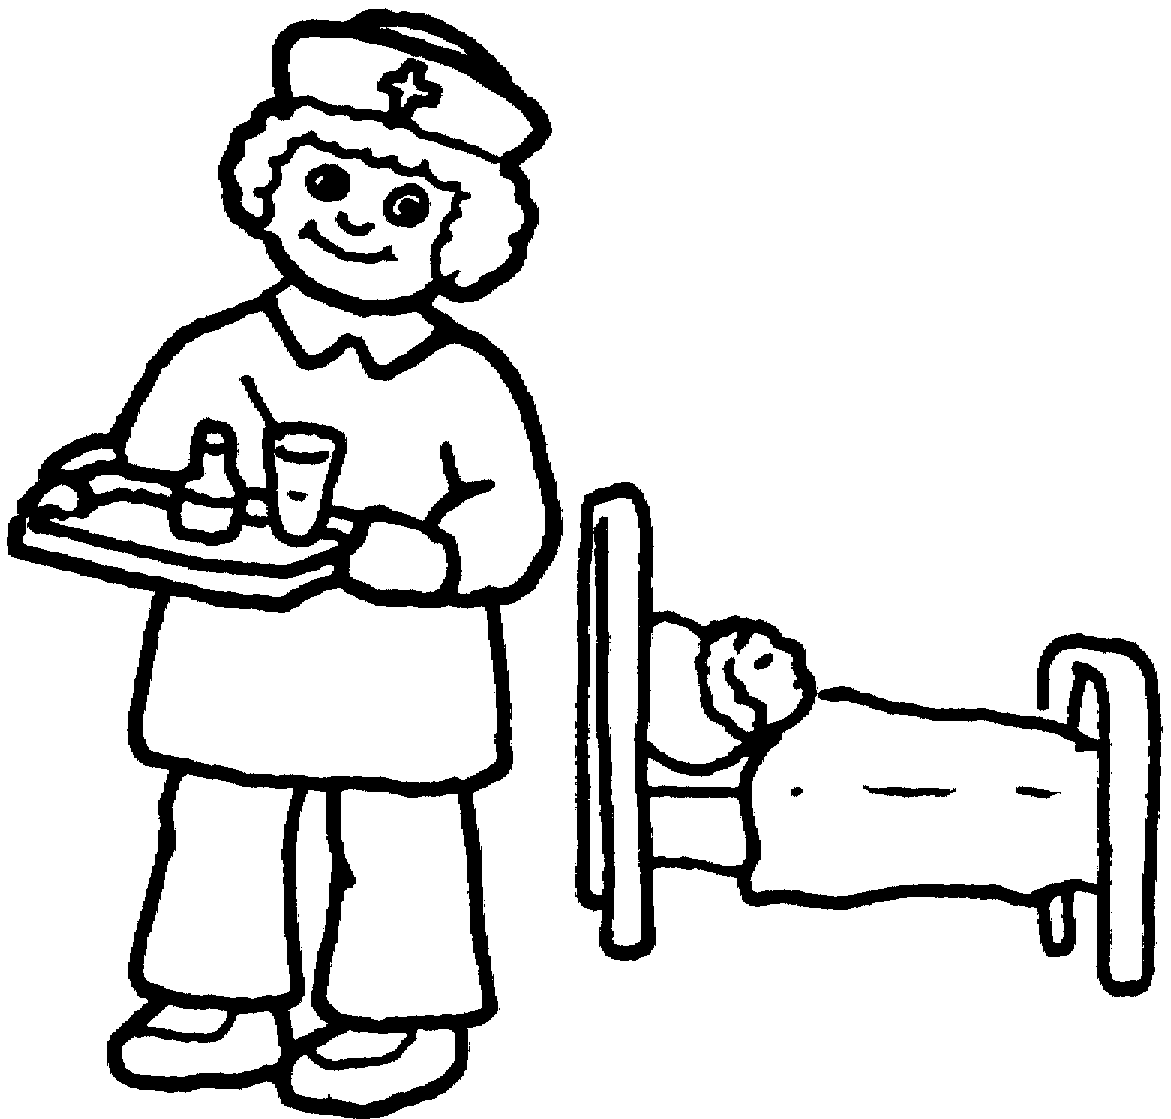 Nursing Coloring Pages To Print - High Quality Coloring Pages